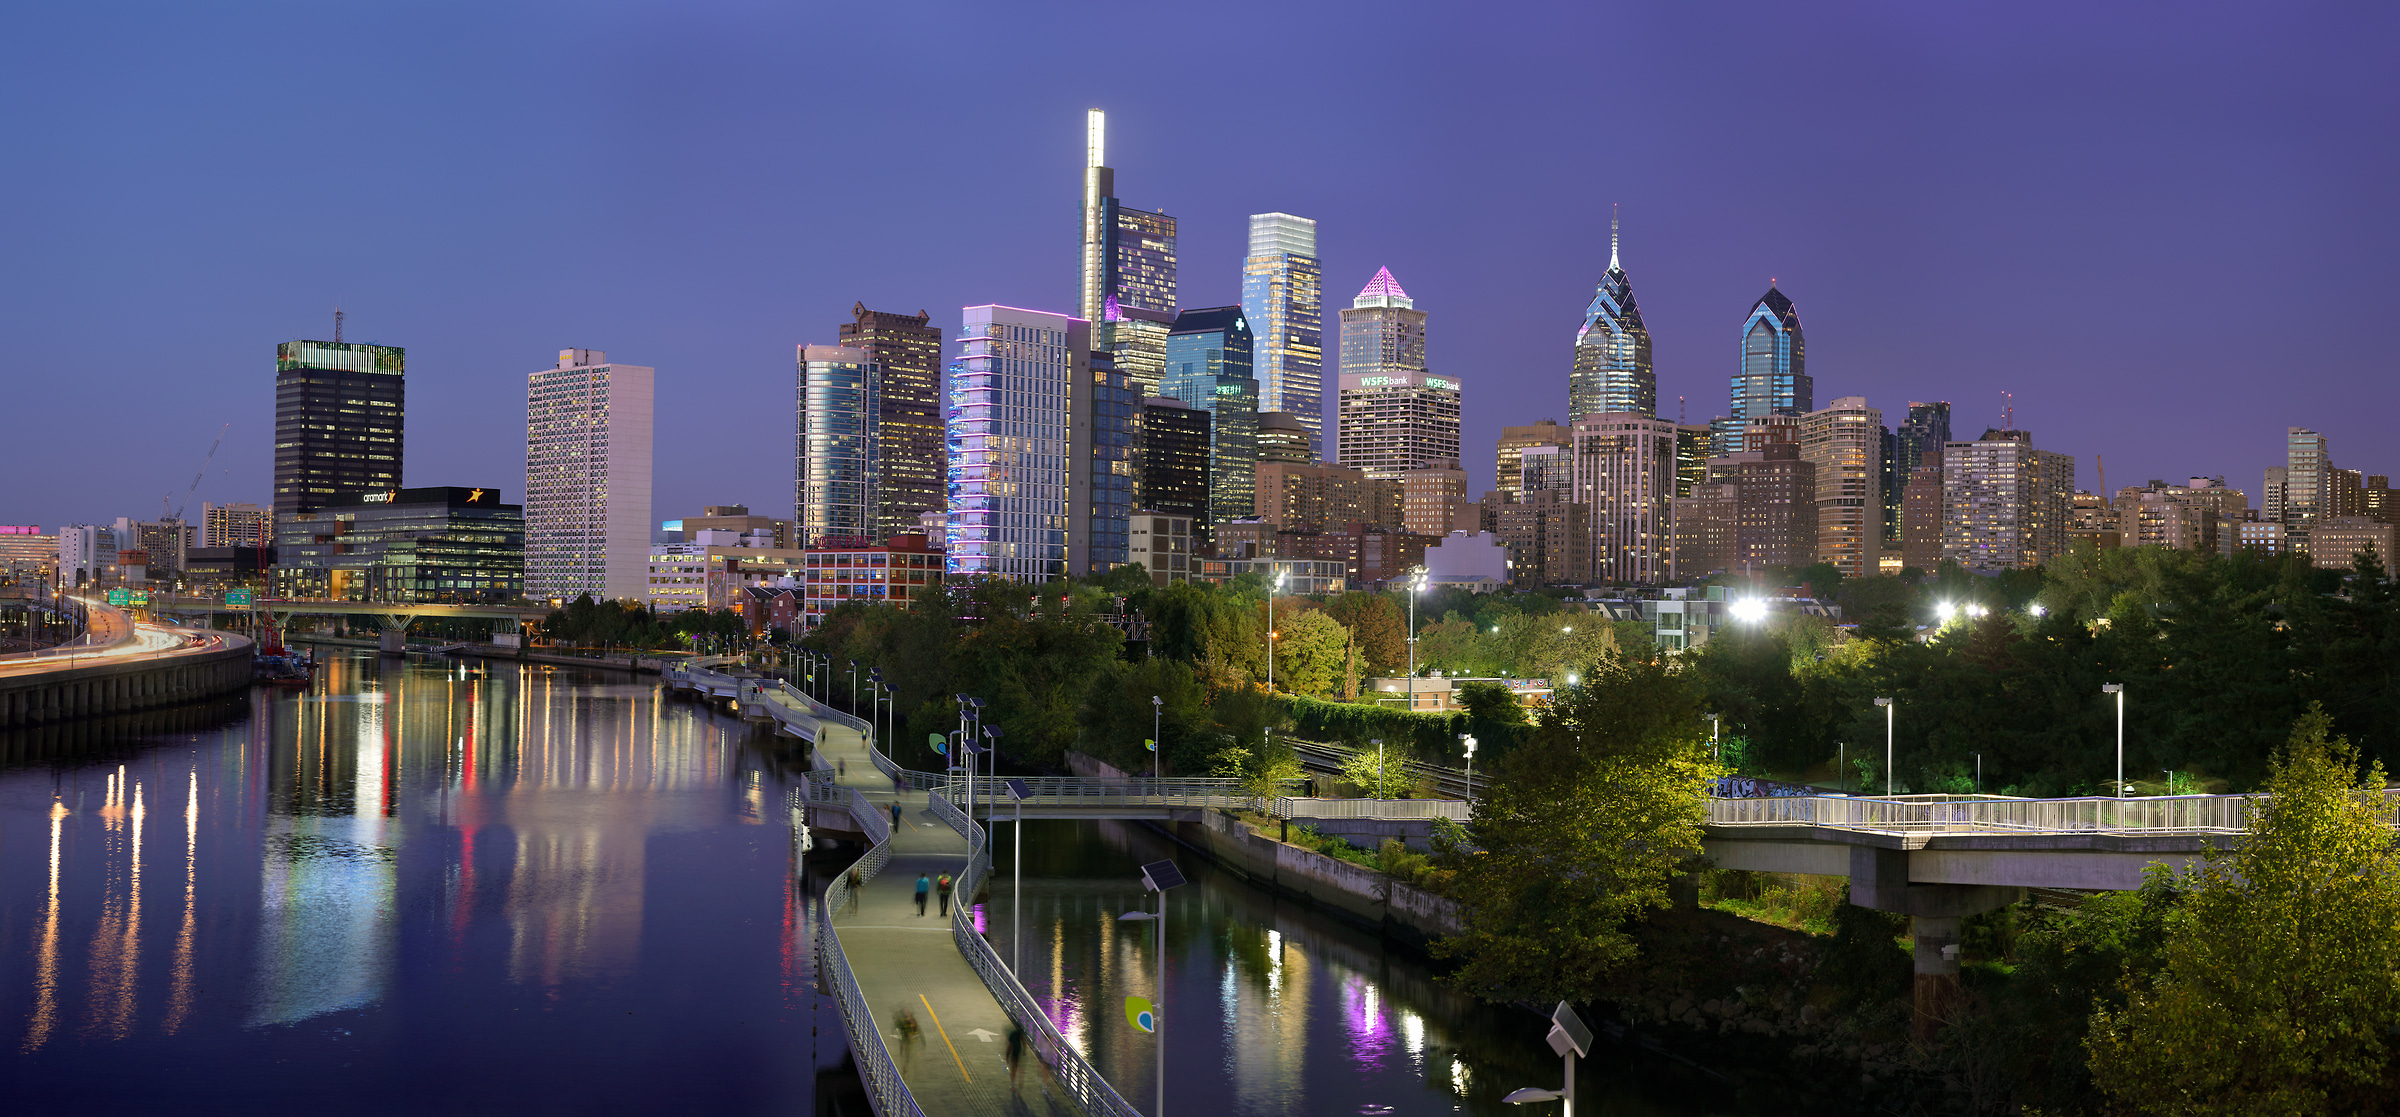 612 megapixels! A very high resolution, large-format VAST photo print of the Philadelphia skyline at dusk; cityscape photograph created by Phil Crawshay in Philadelphia, PA.